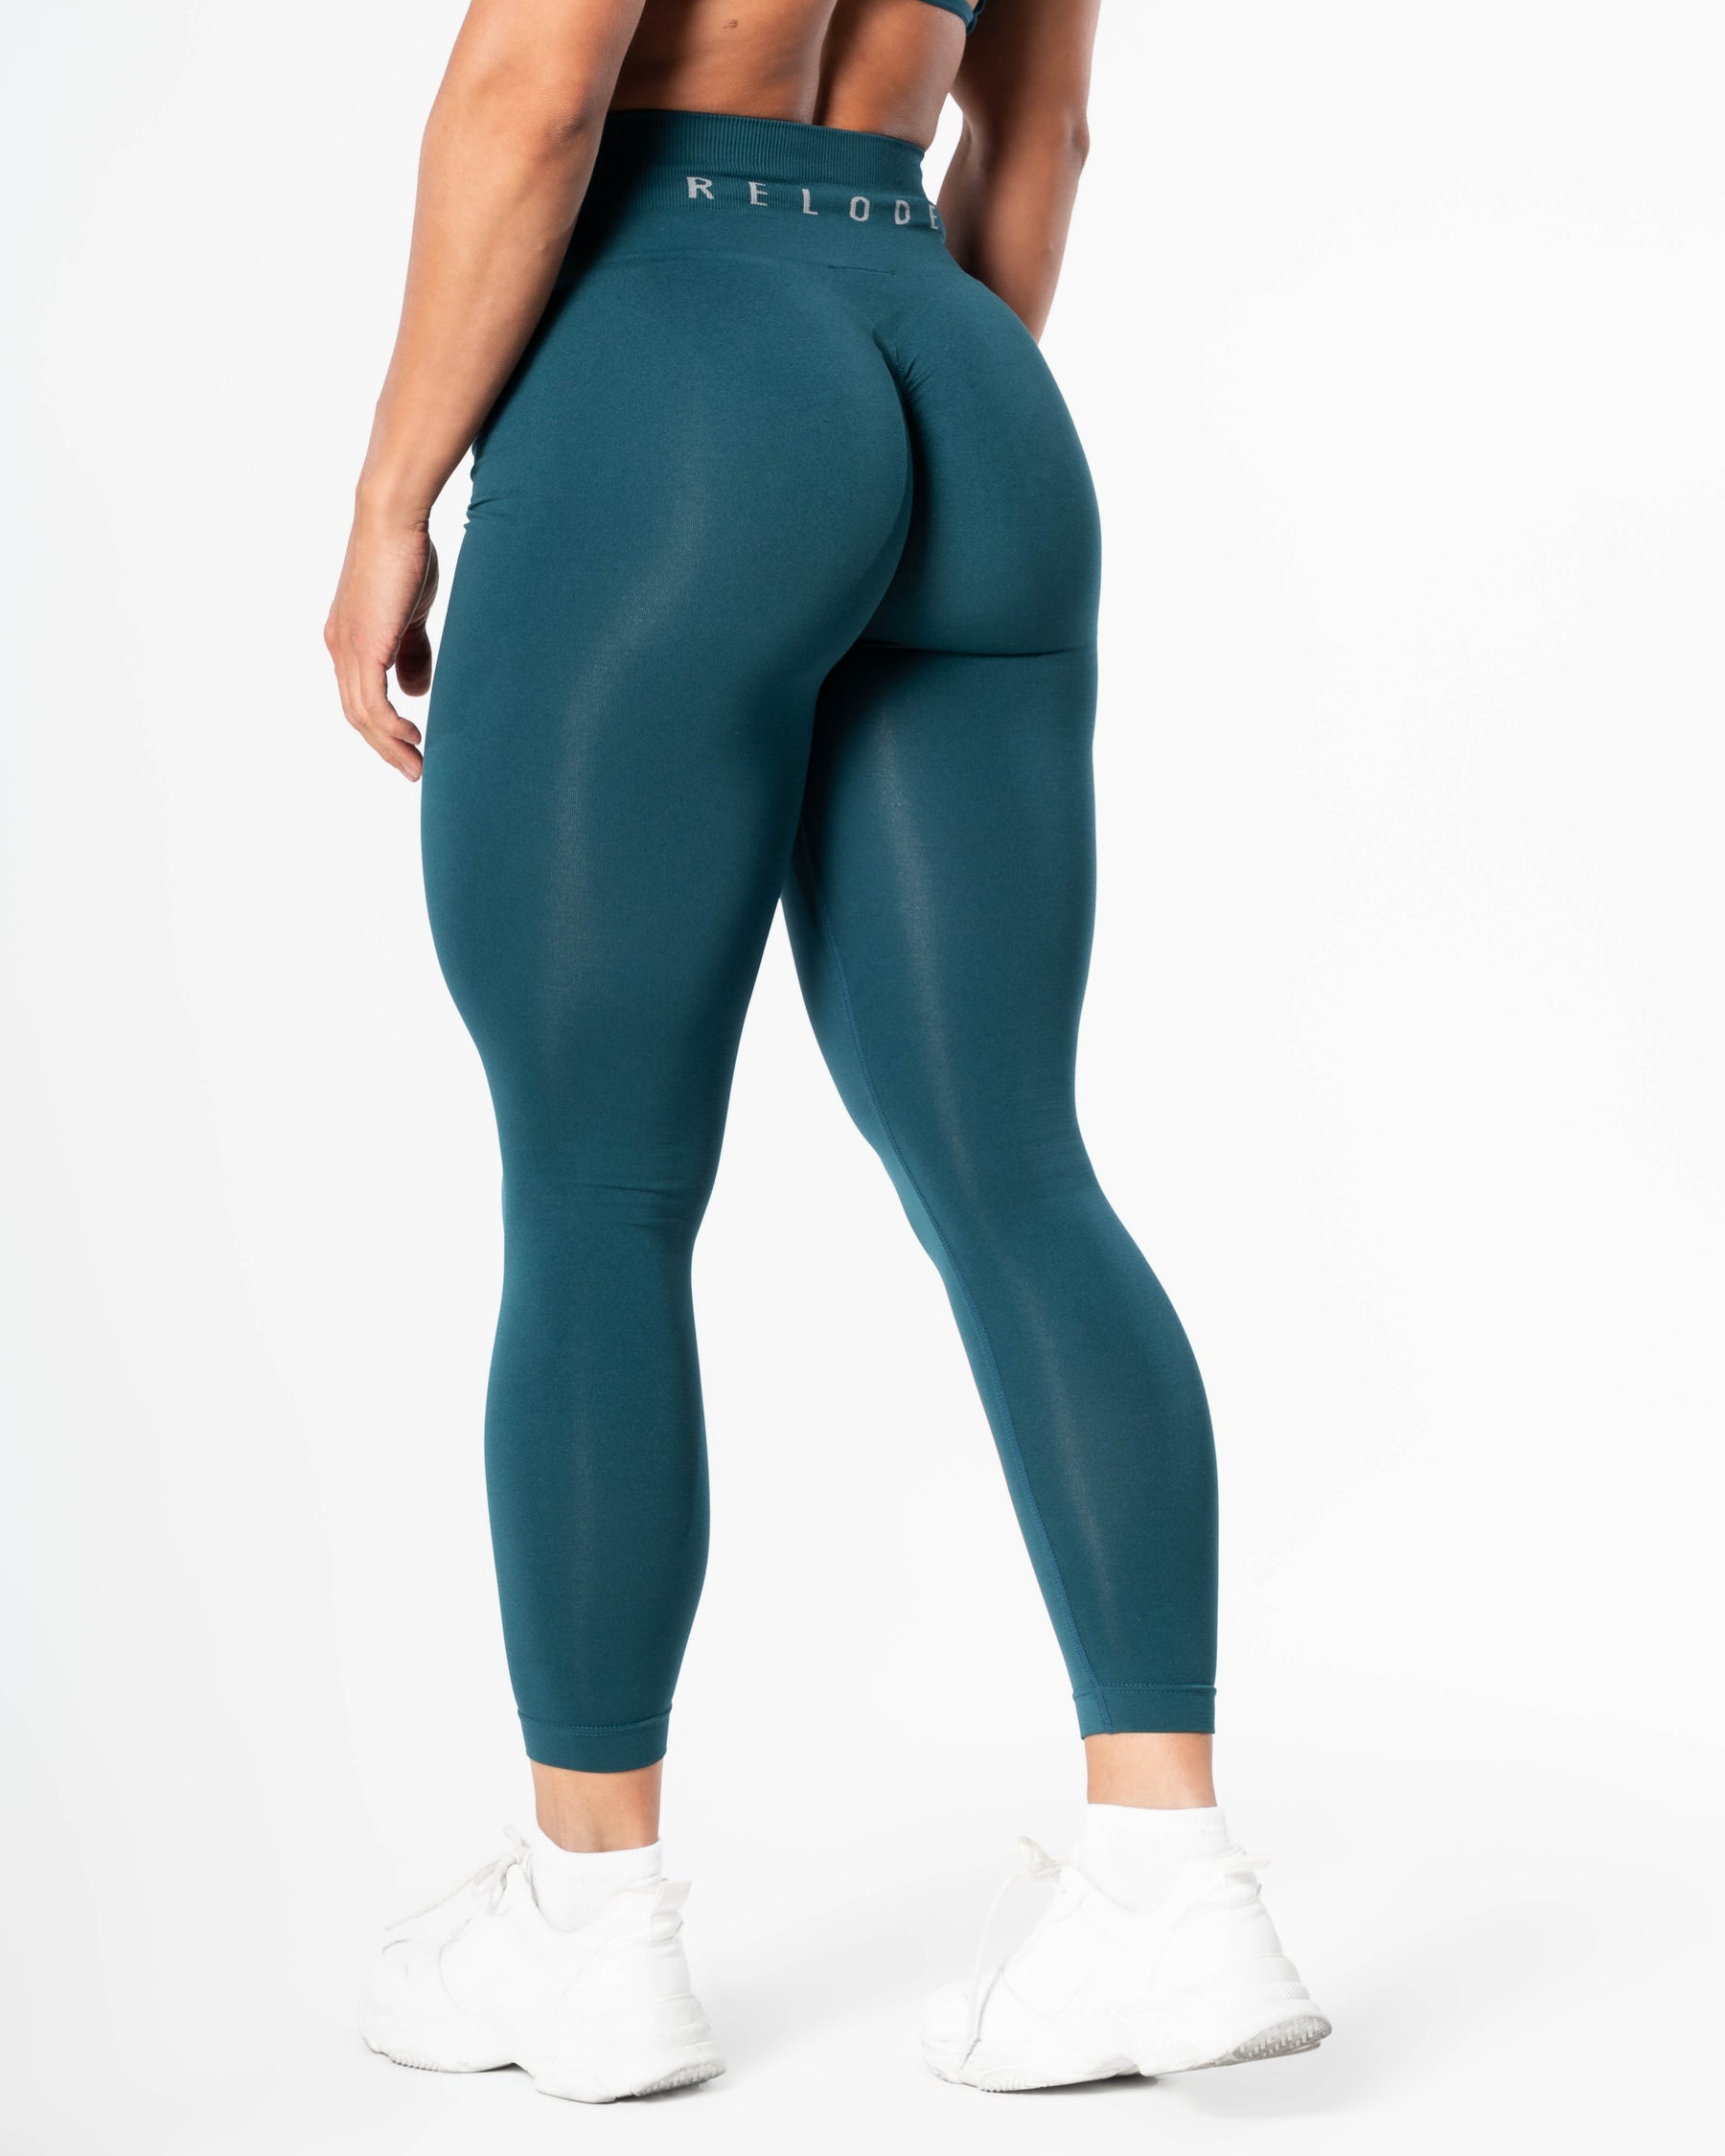 Prime Scrunch Tights - Teal green